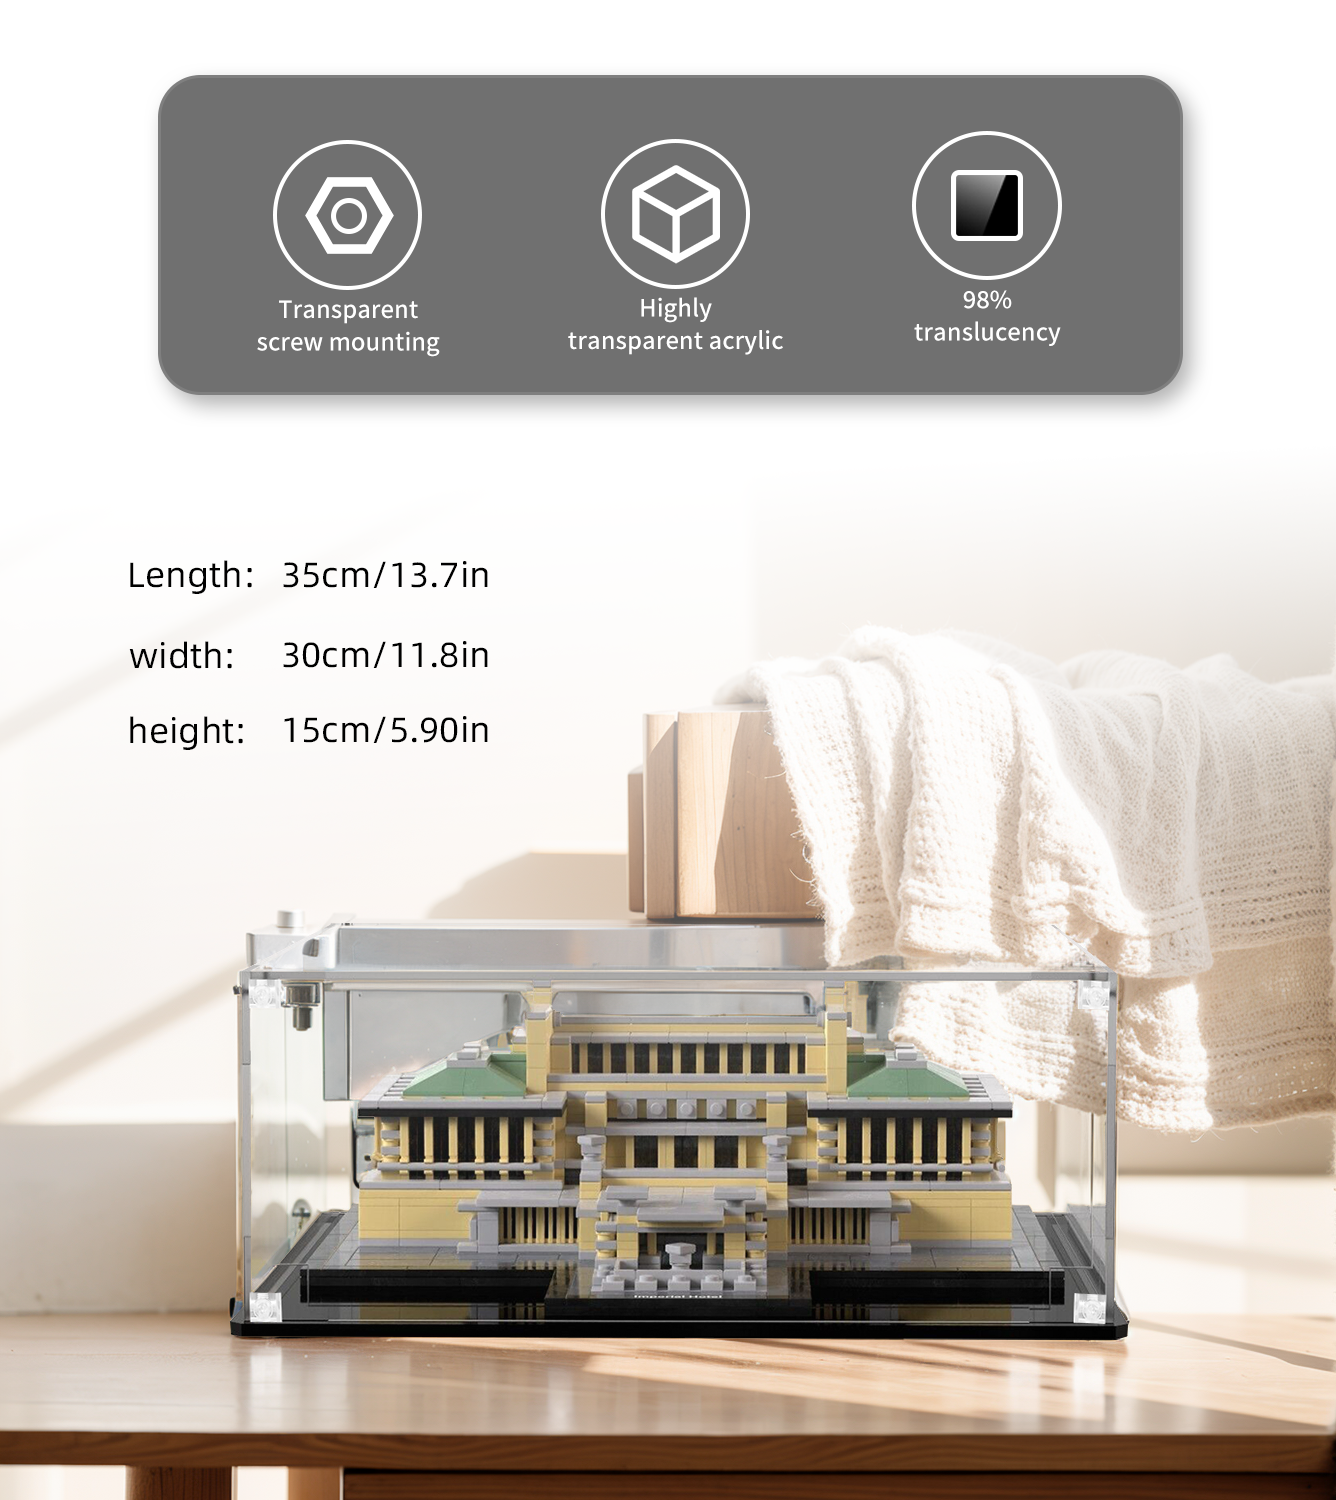 Display case for Lego Architecture Imperial Hotel 21017